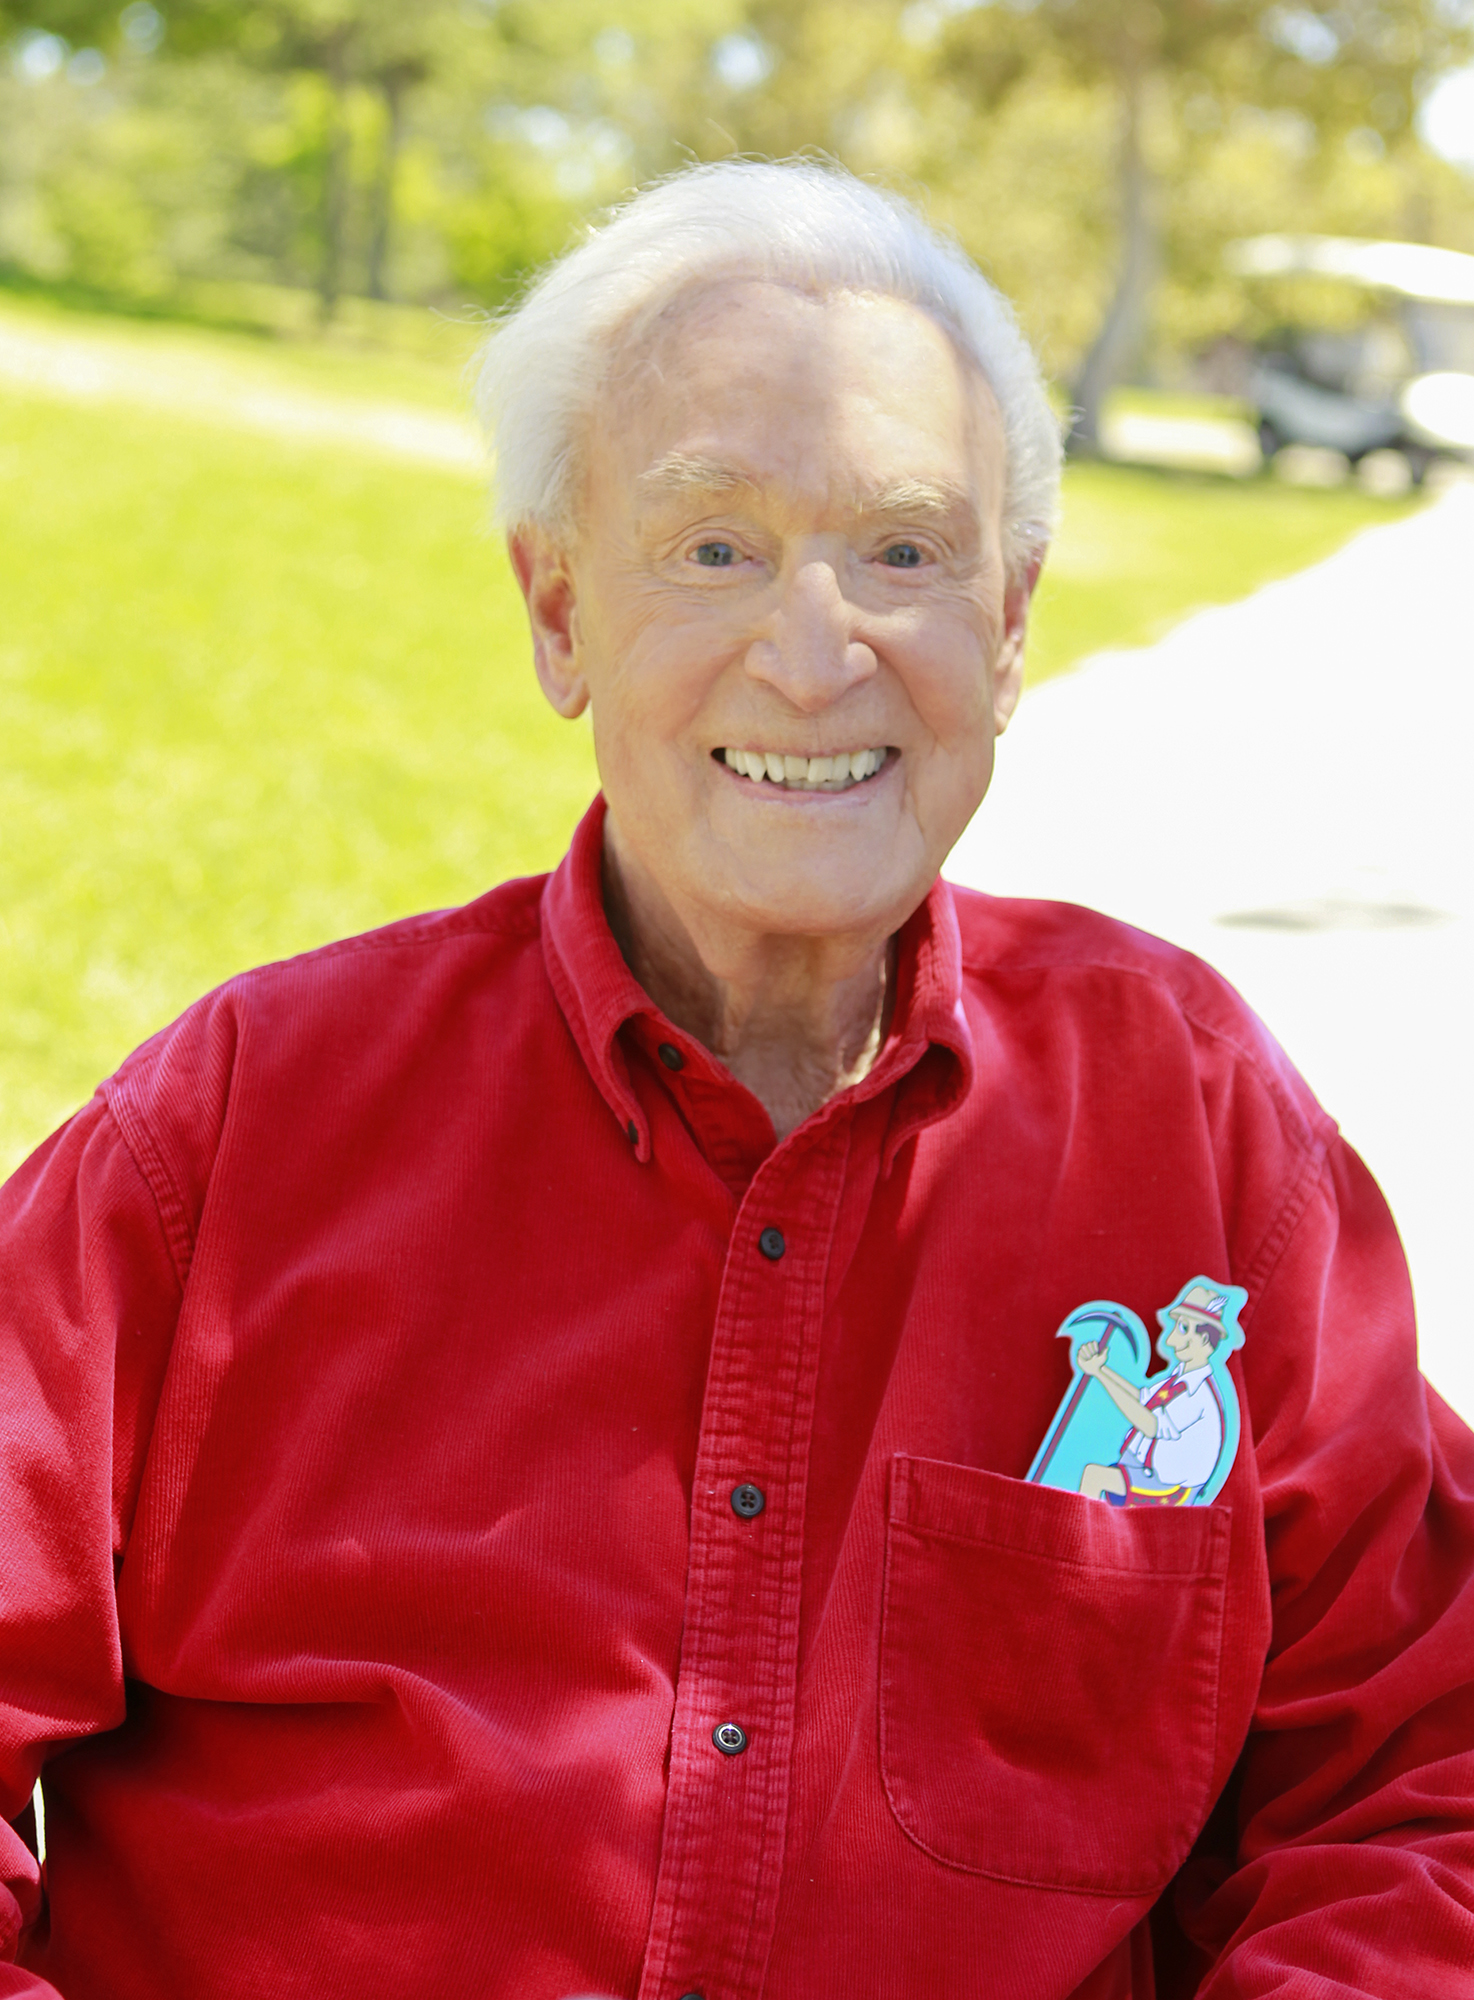 Hitching a ride with Bob Barker